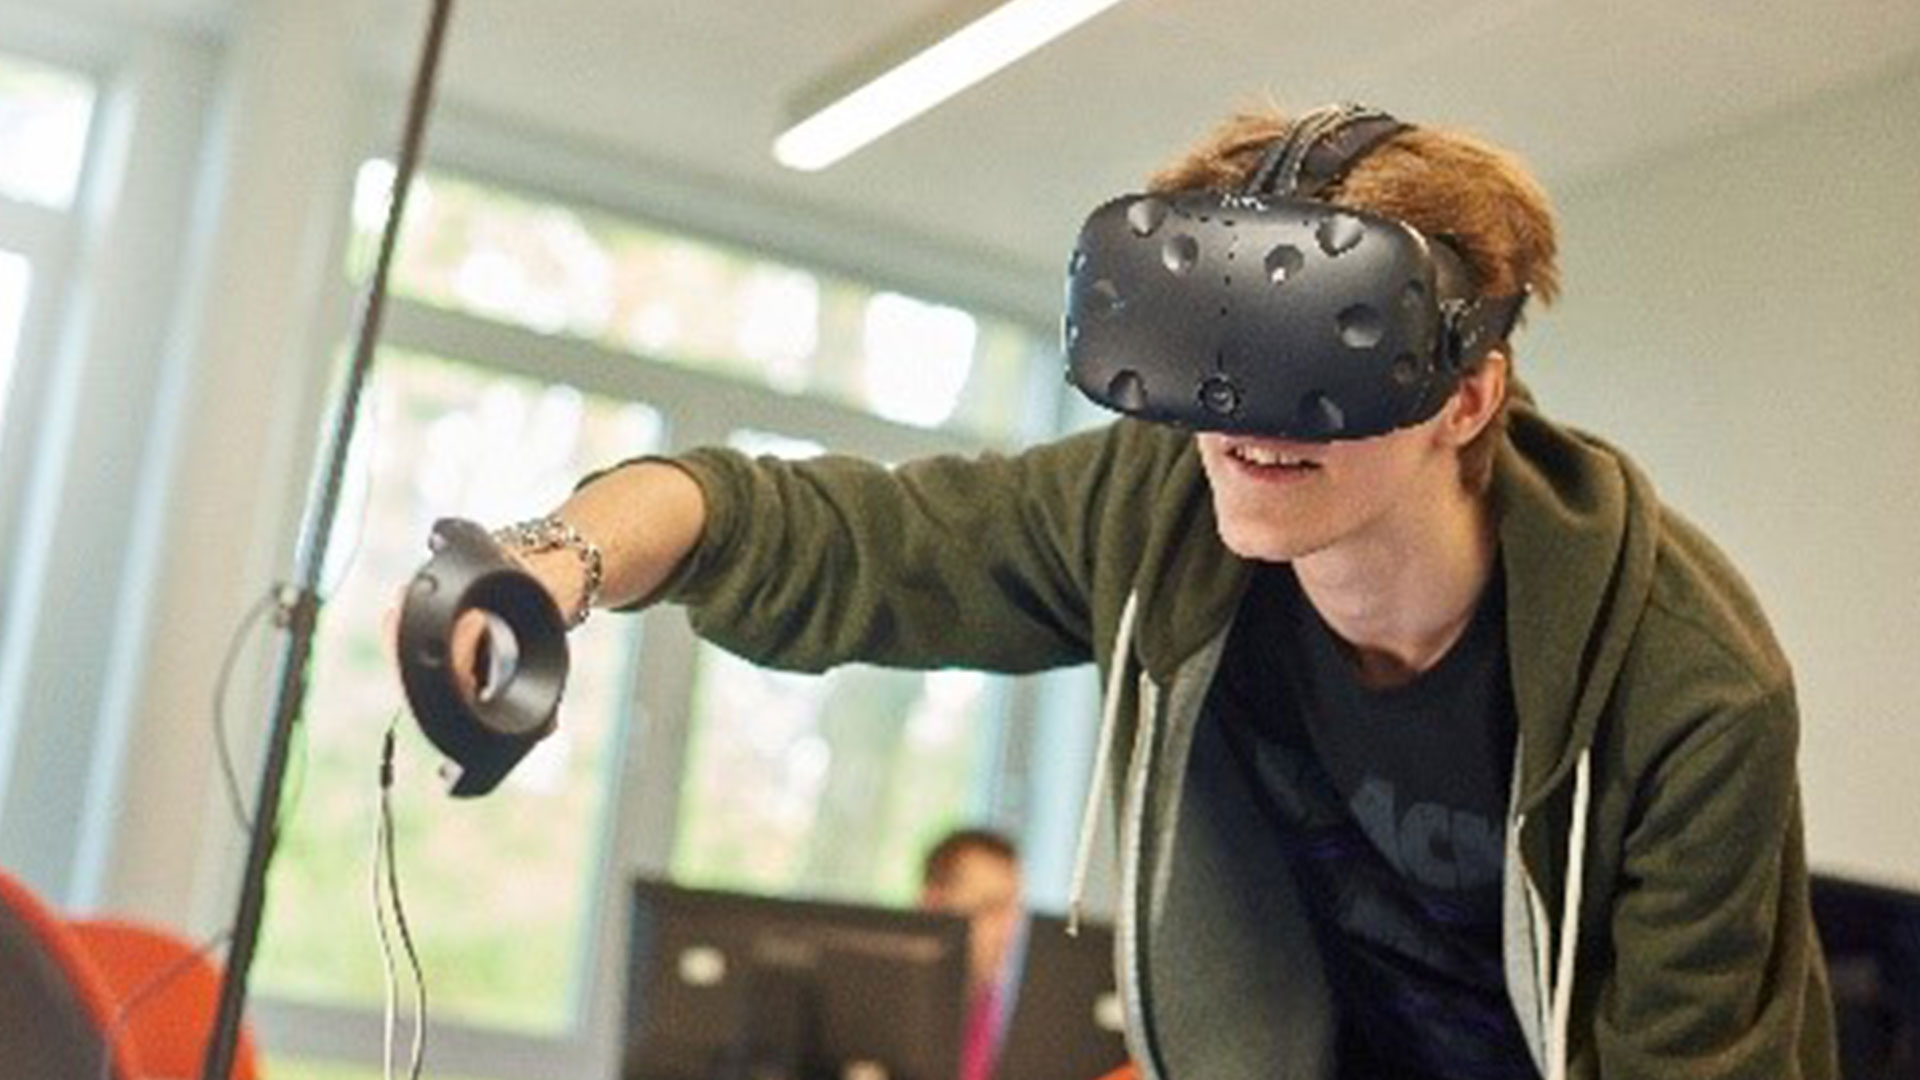 Student with a virtual reality headset on